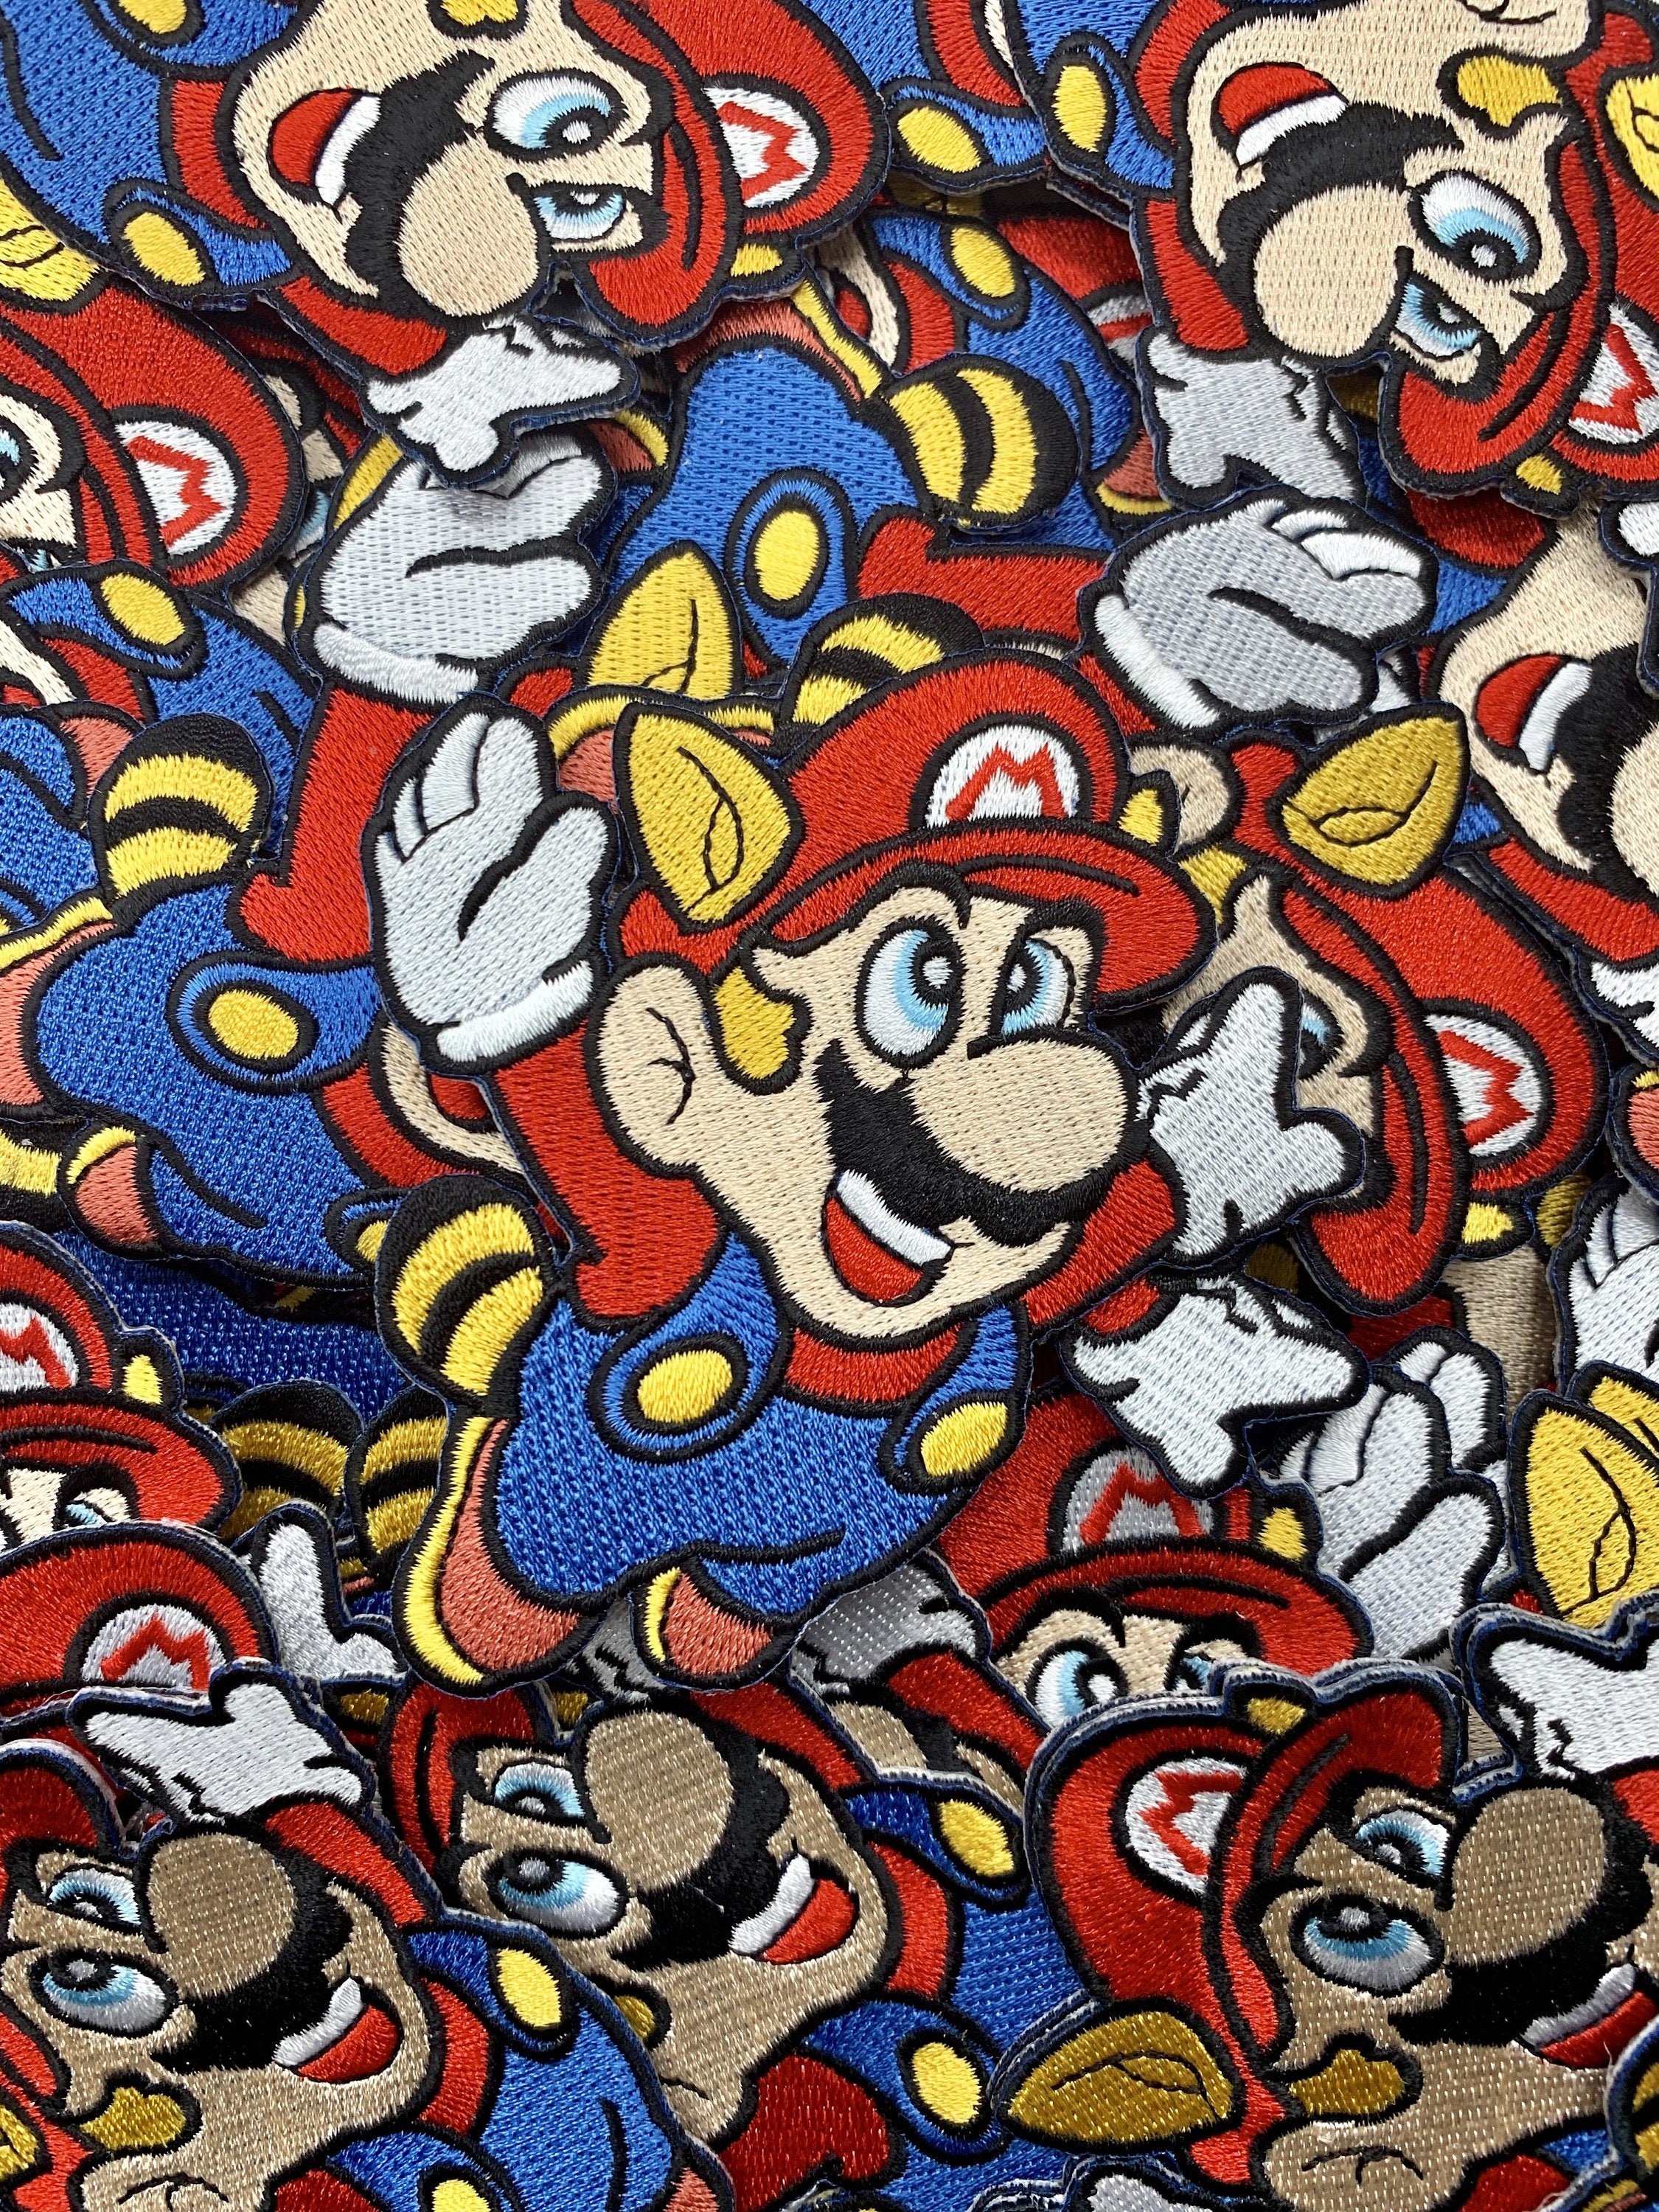 Super Mario Brothers Embroidered Iron On Patches 